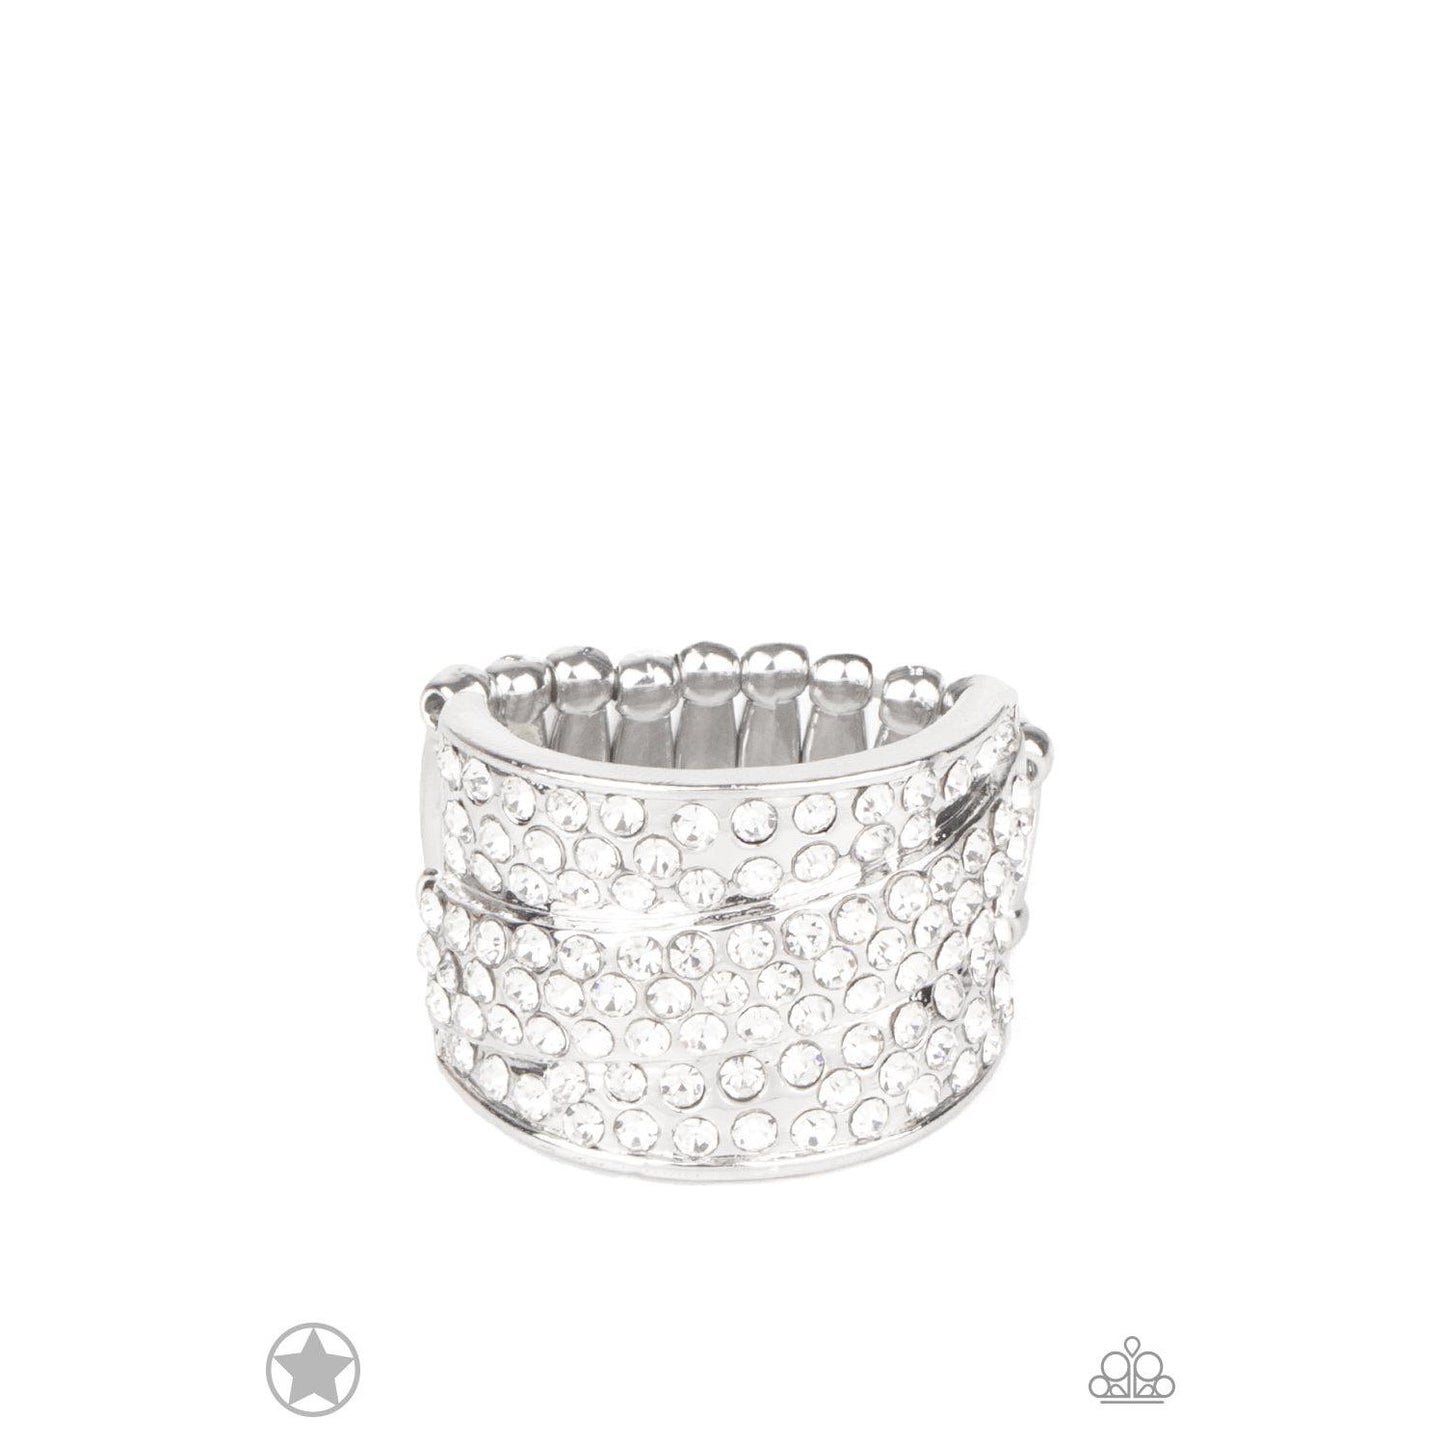 The Millionaires Club - White Rhinestone Blockbuster Ring - A Large Selection Hand-Chains And Jewelry On rainbowartsreview,Women's Jewelry | Necklaces, Earrings, Bracelets